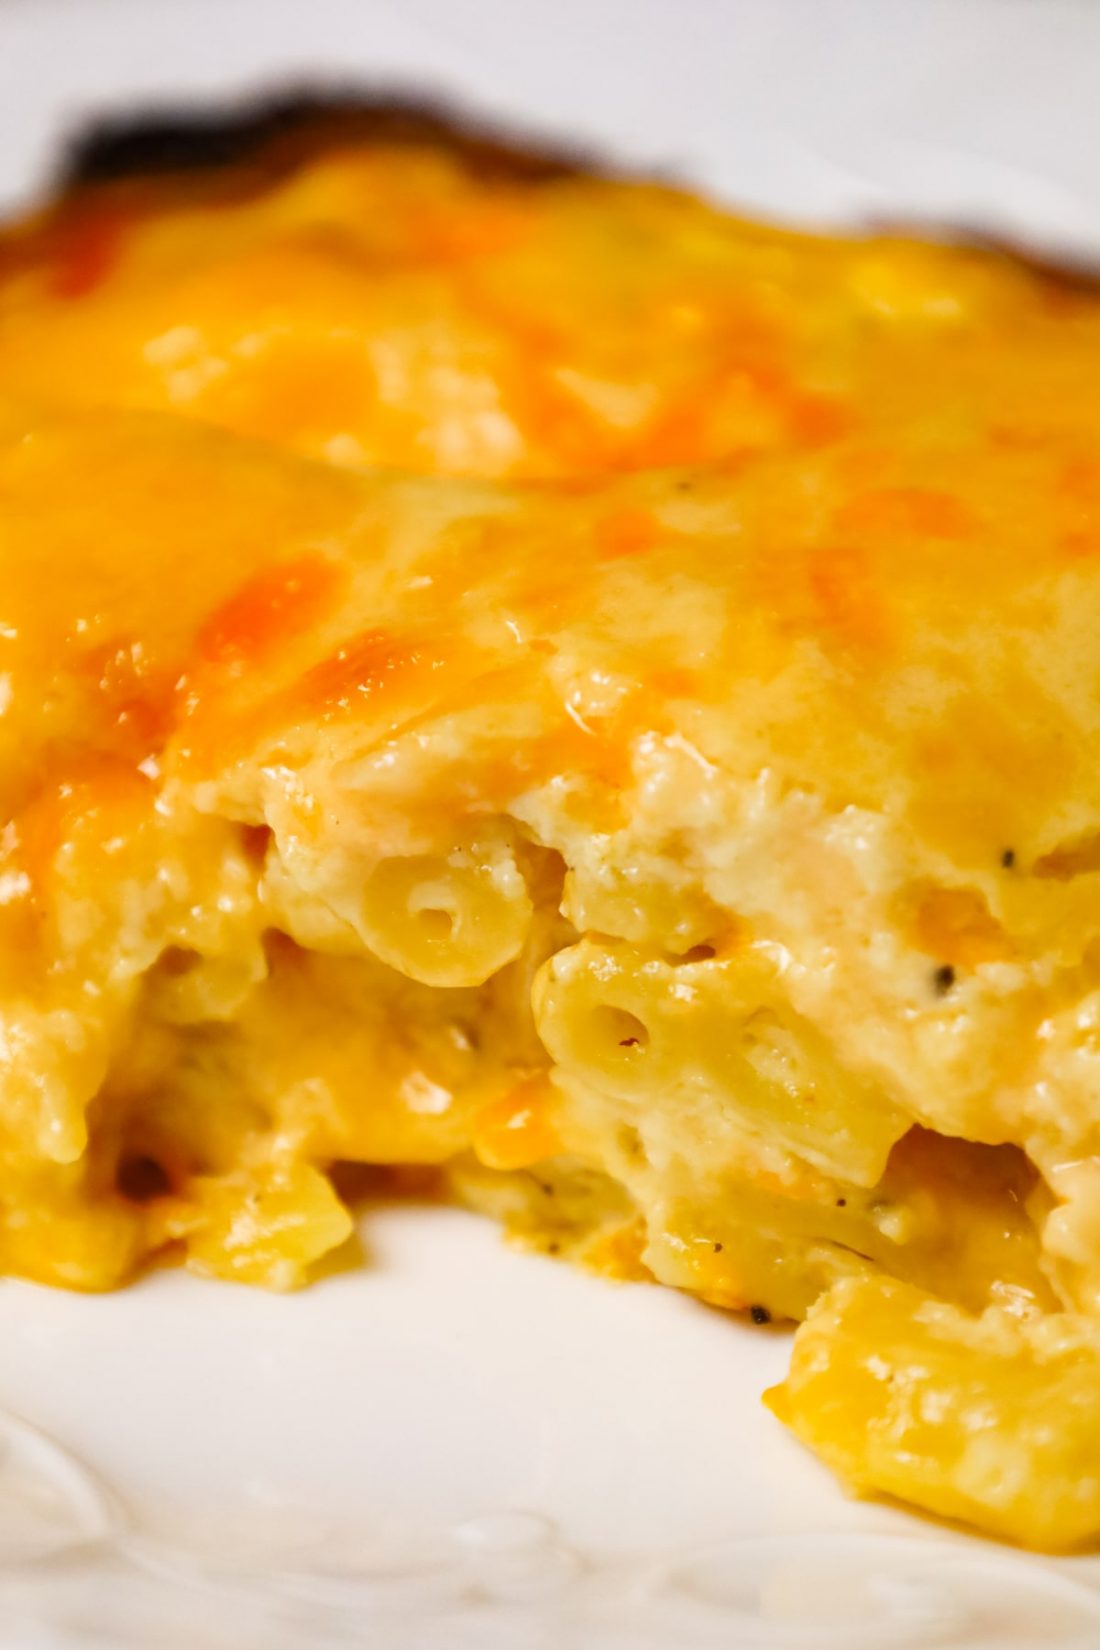 Southern Baked Mac and Cheese - THIS IS NOT DIET FOOD